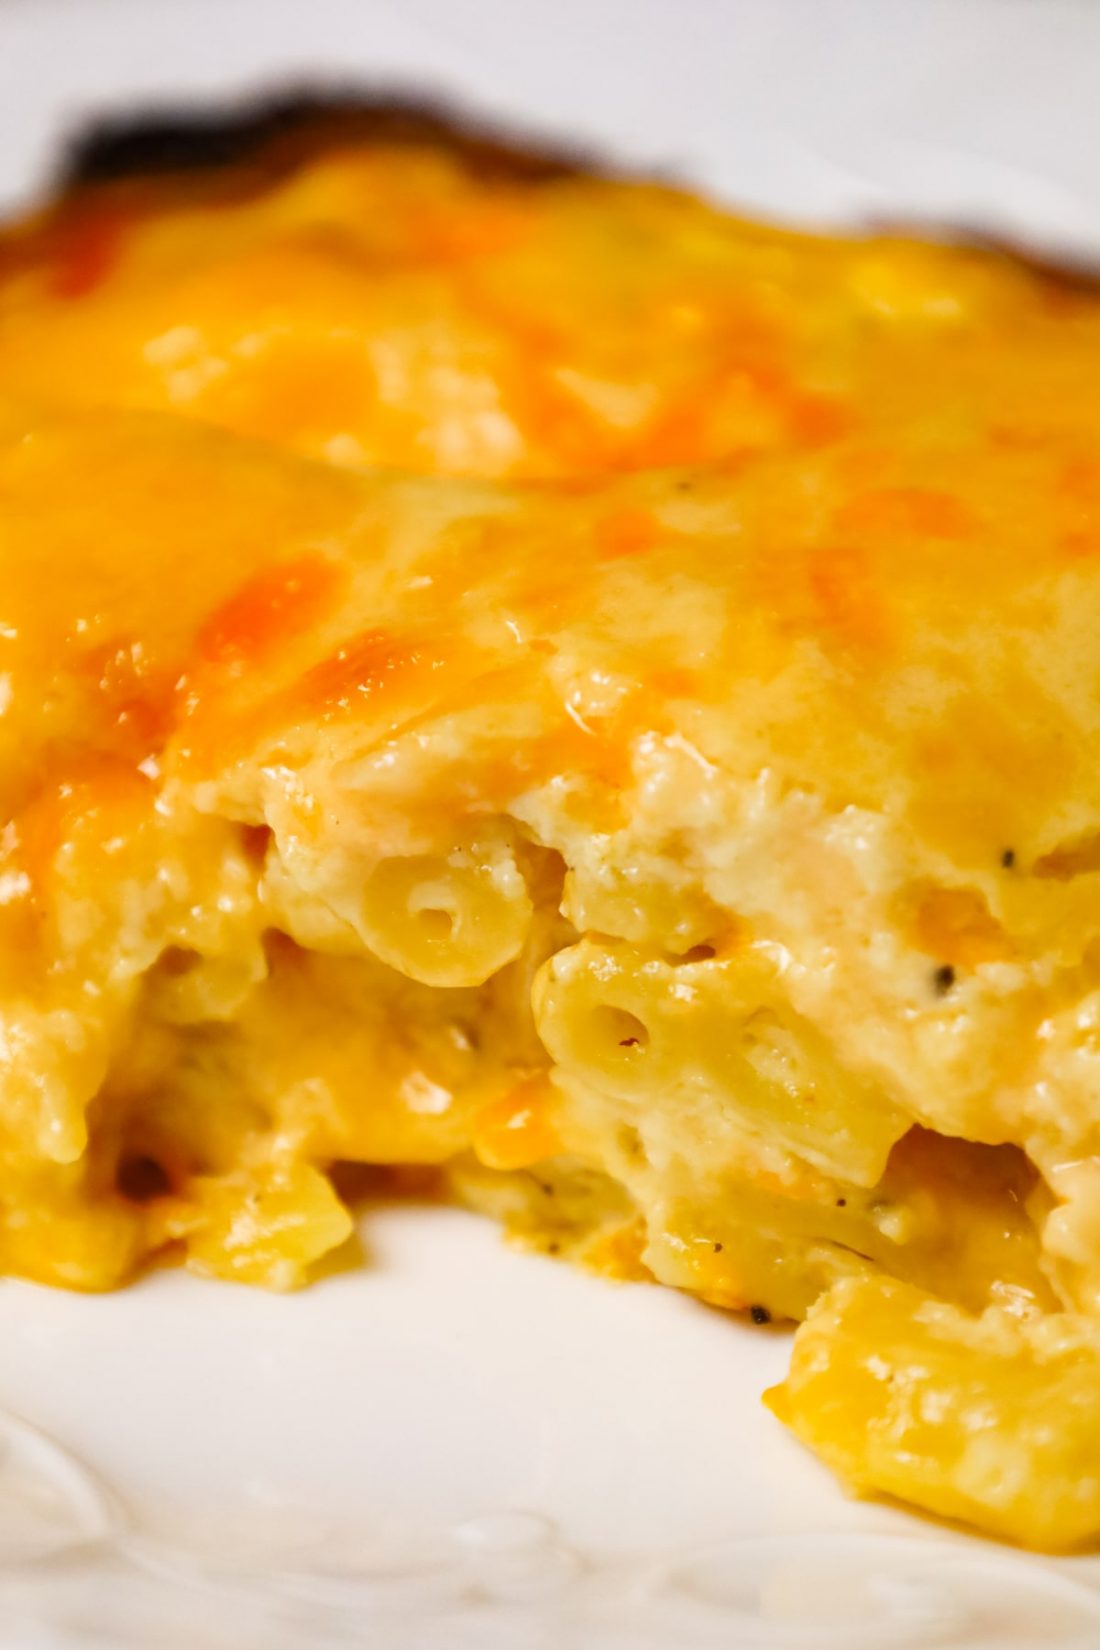 Southern Baked Mac and Cheese - THIS IS NOT DIET FOOD